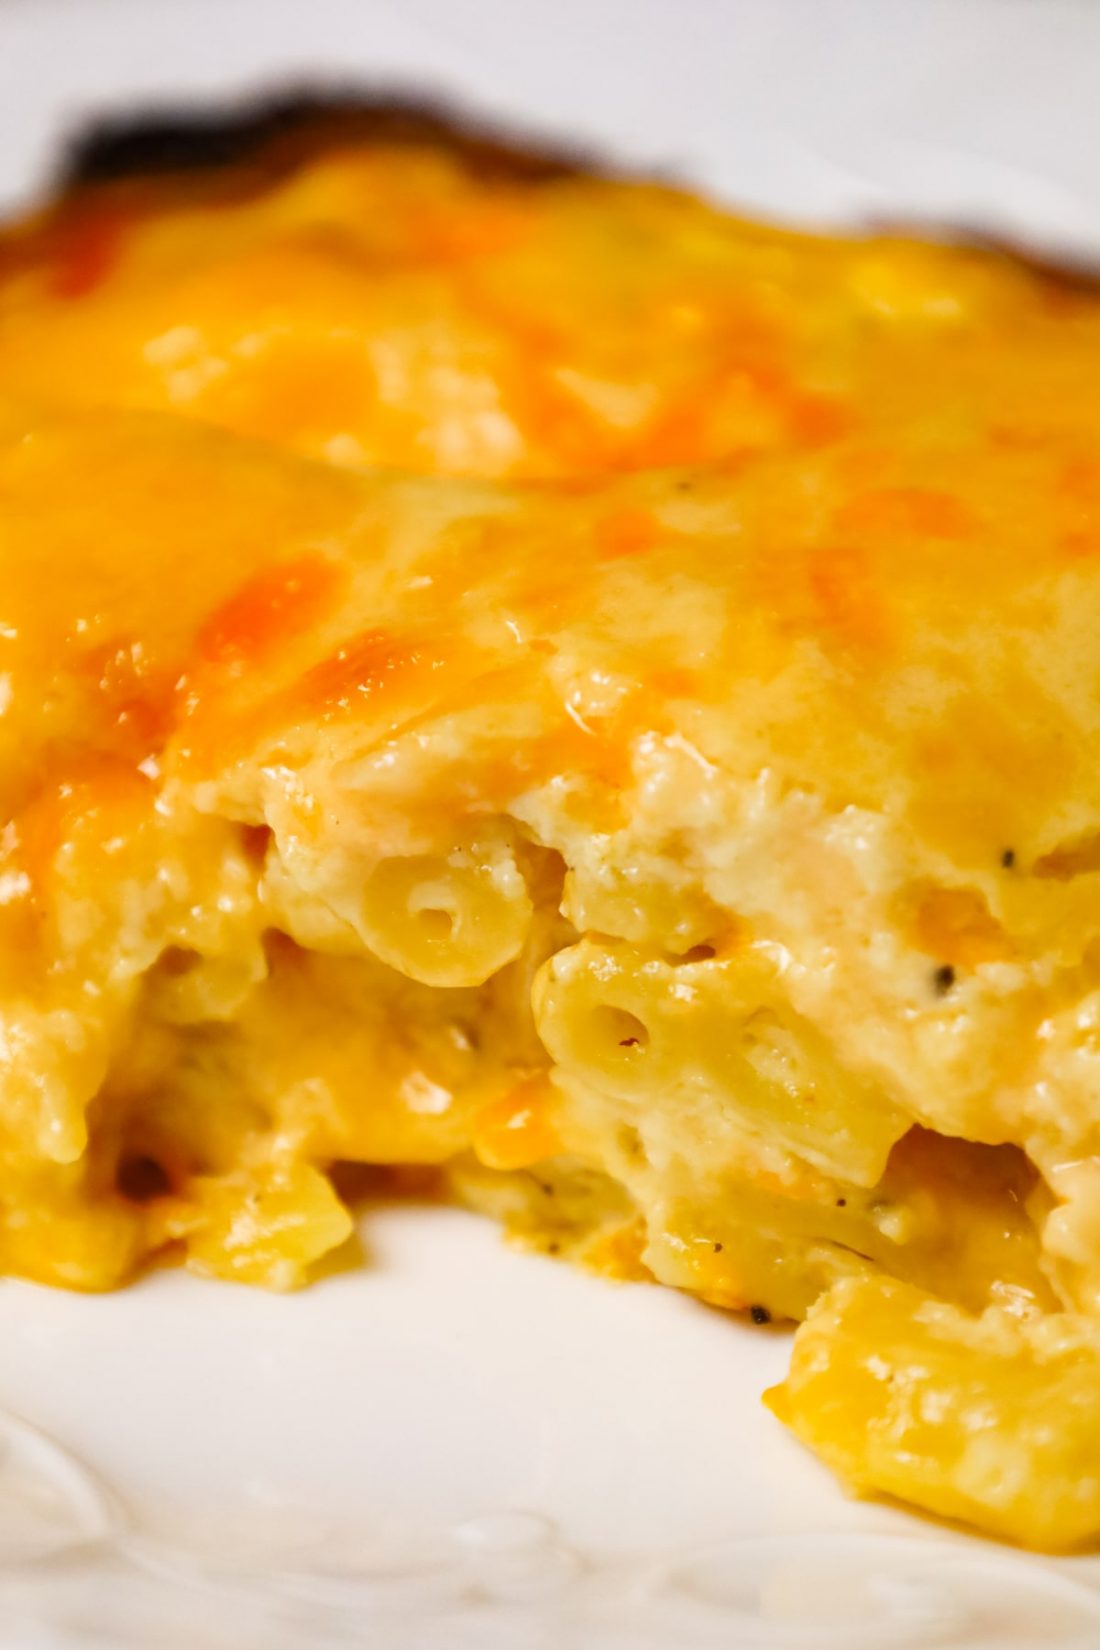 Southern Baked Mac and Cheese - THIS IS NOT DIET FOOD